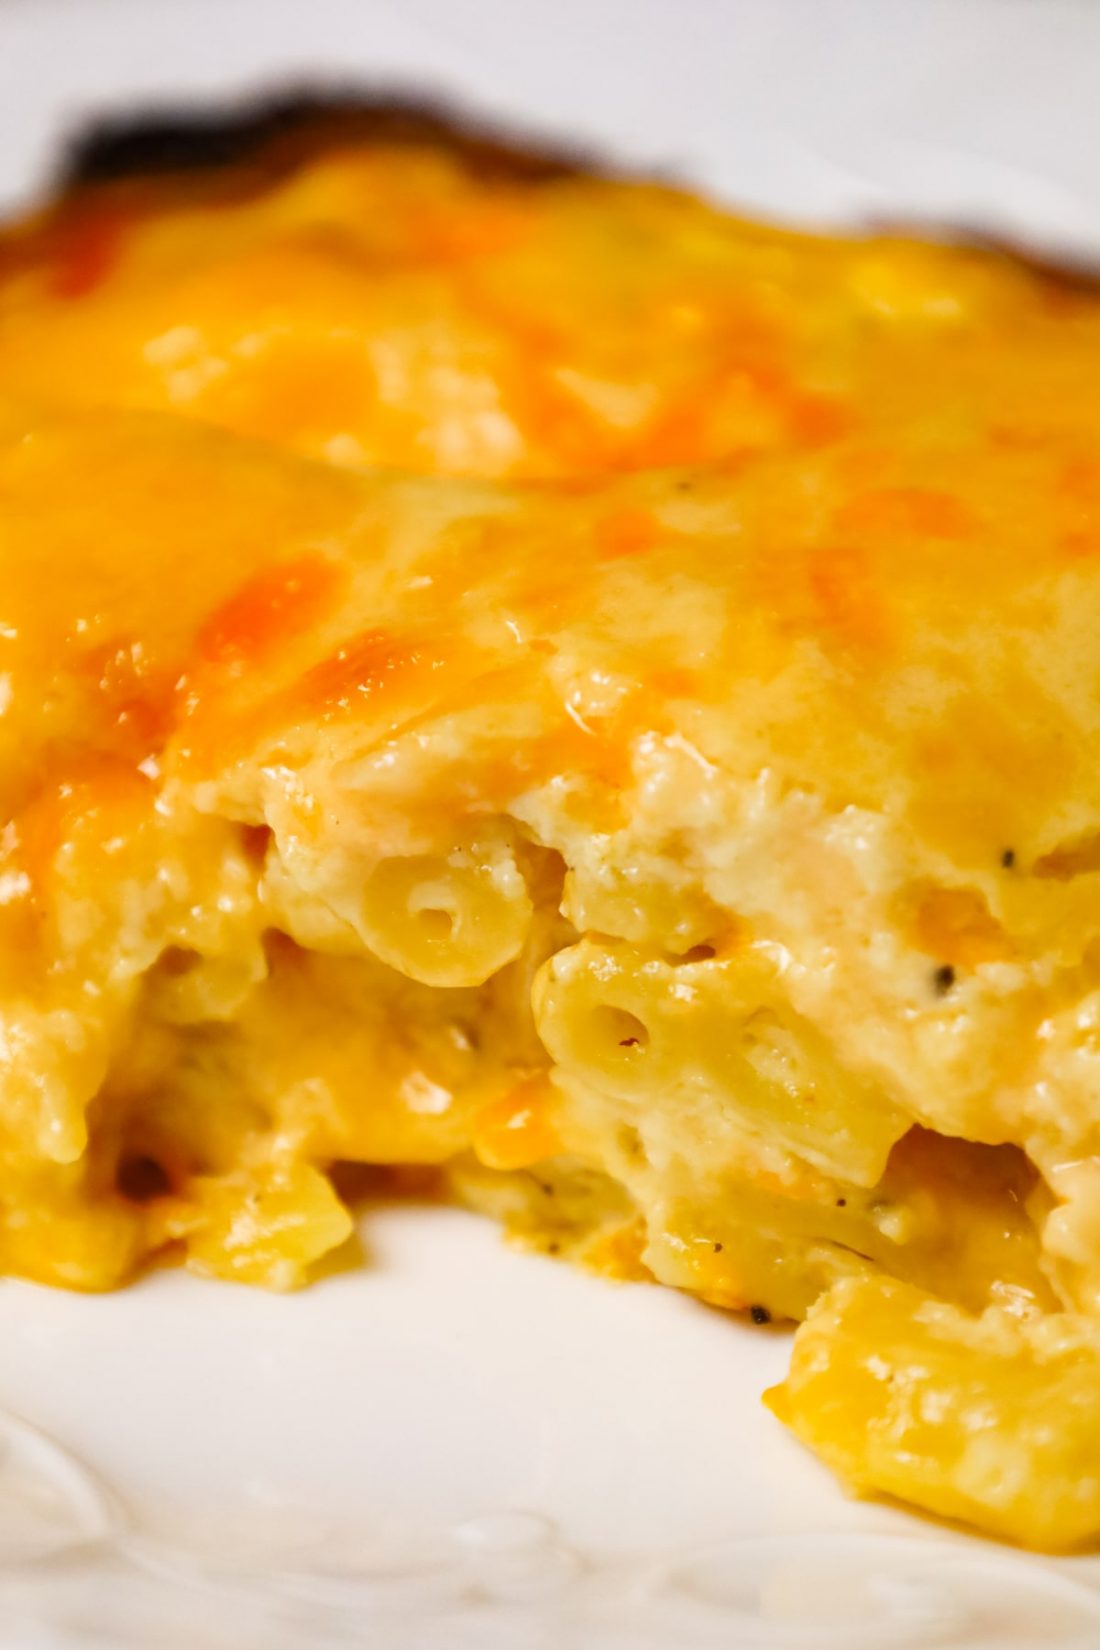 Southern Baked Mac and Cheese - THIS IS NOT DIET FOOD